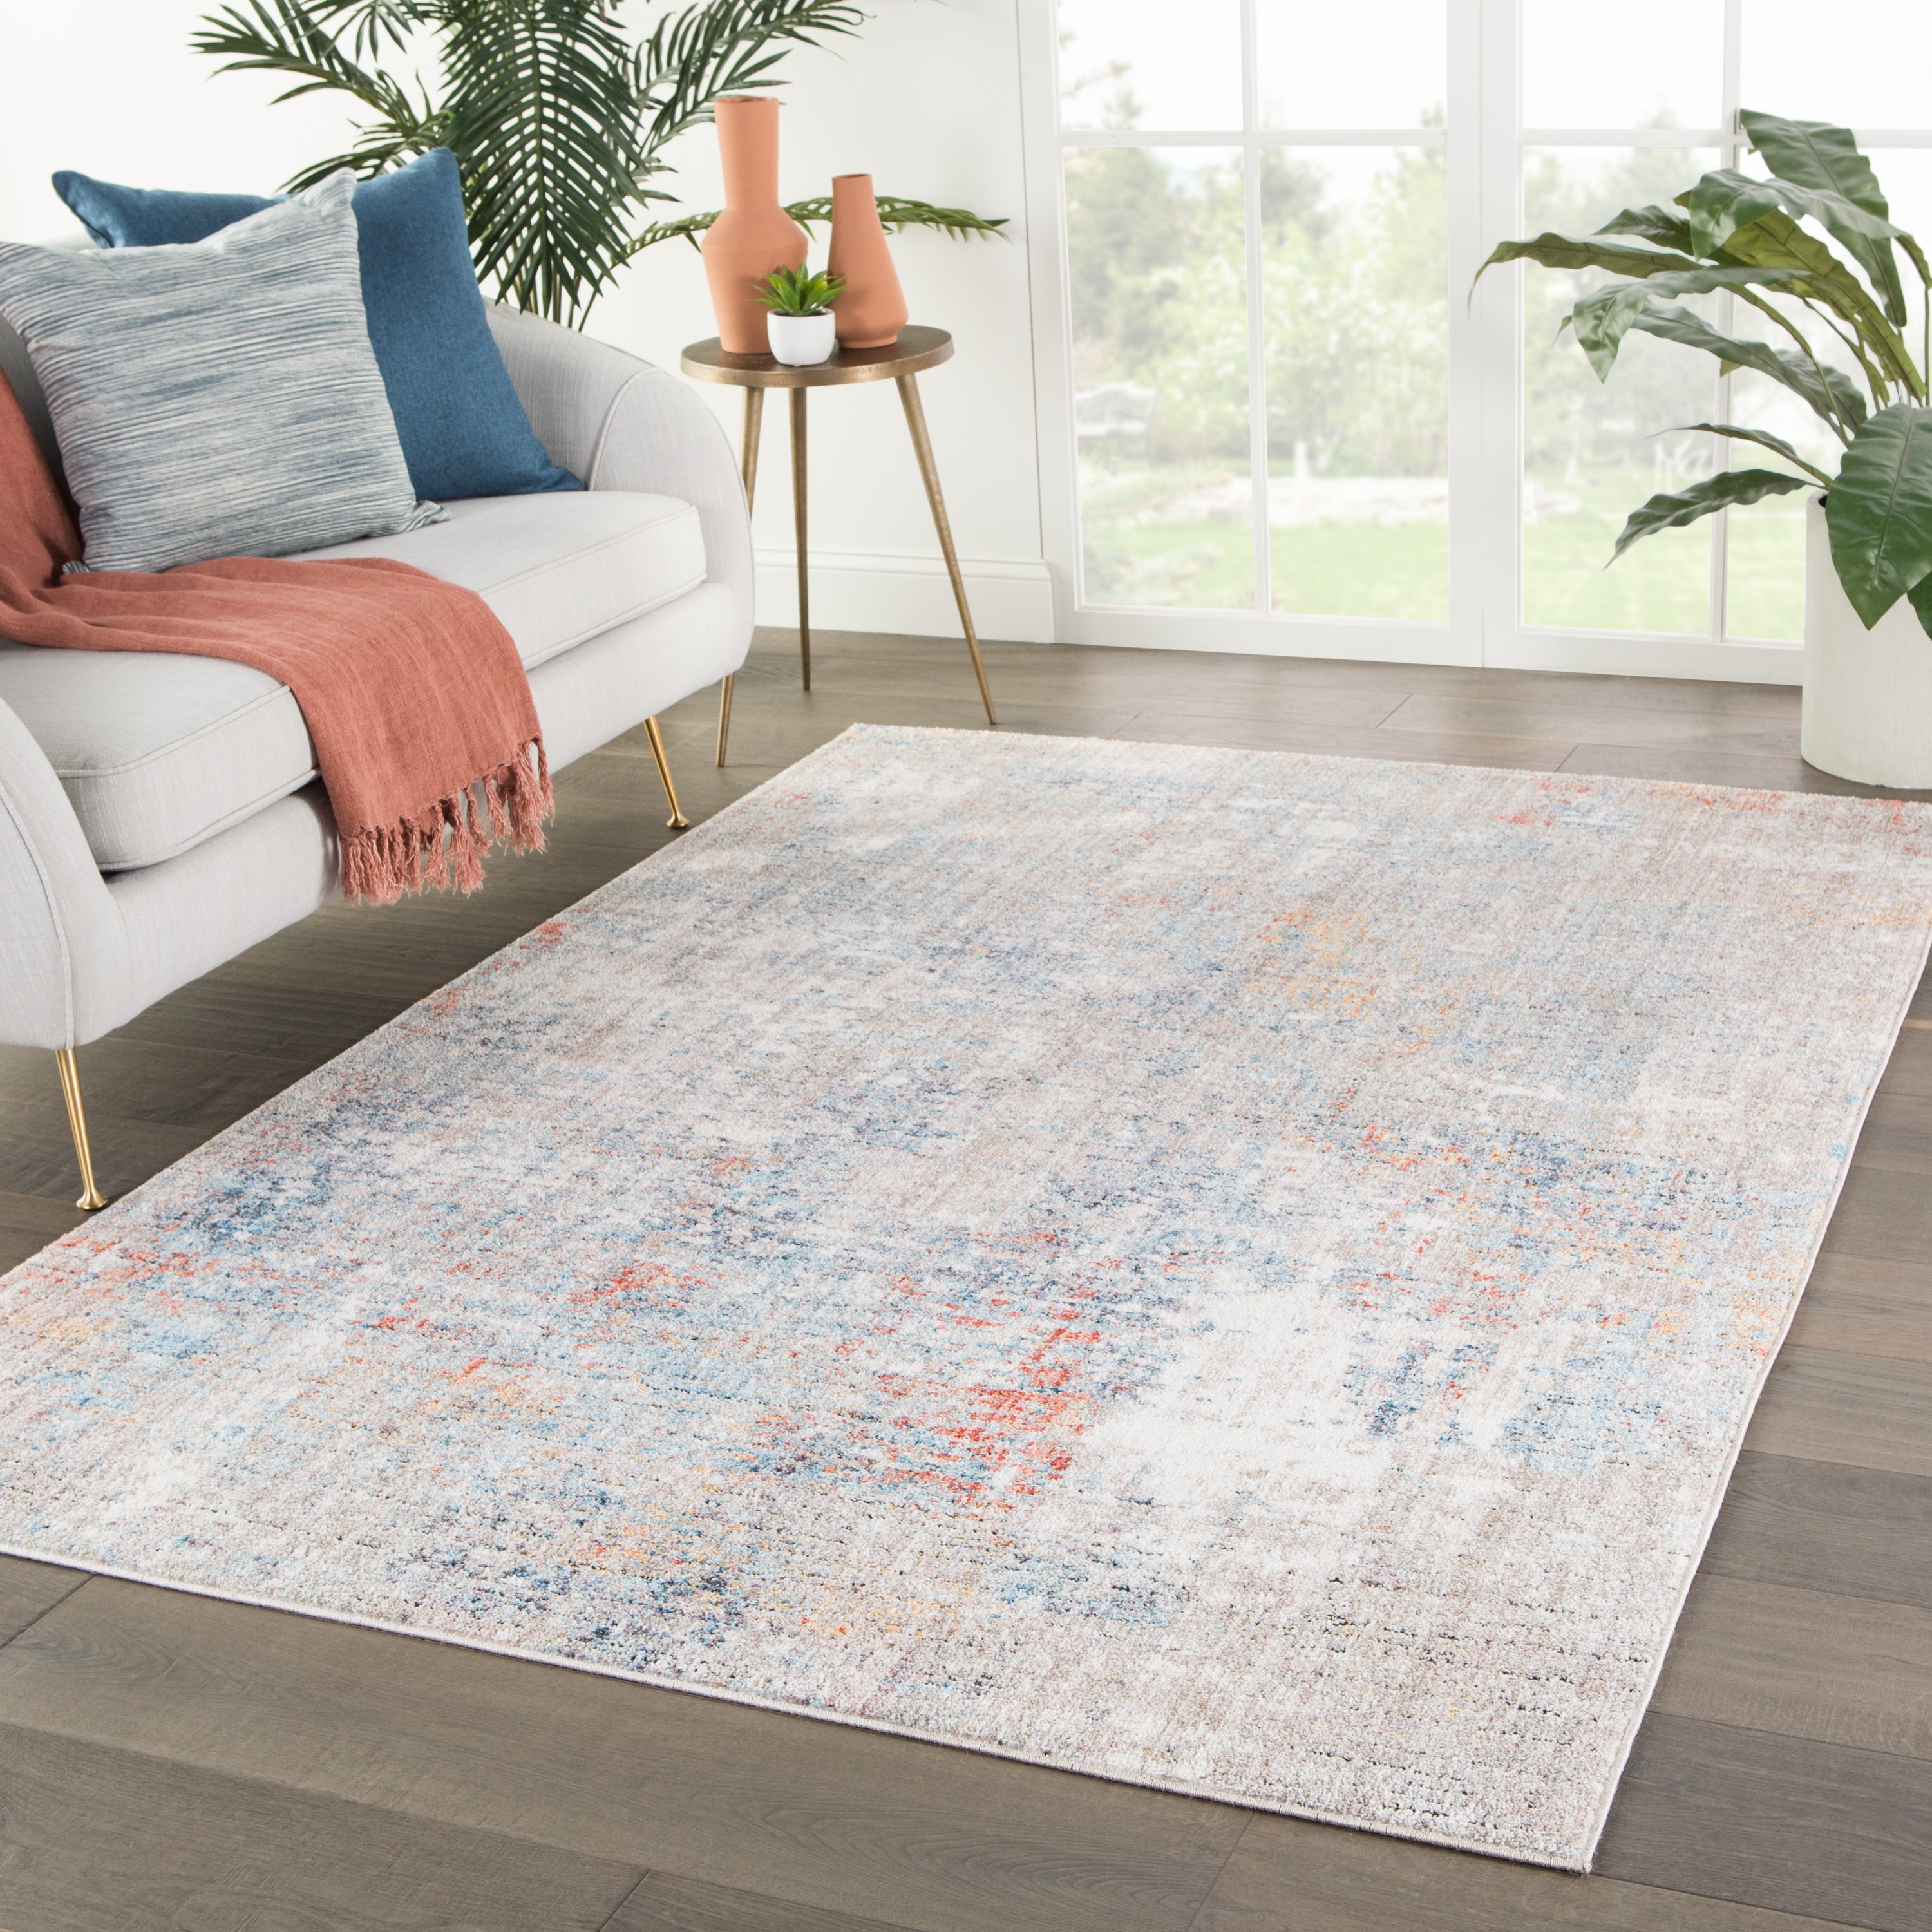 Edgewood Abstract Multicolor Area Rug (8'10"X12') - Image 4